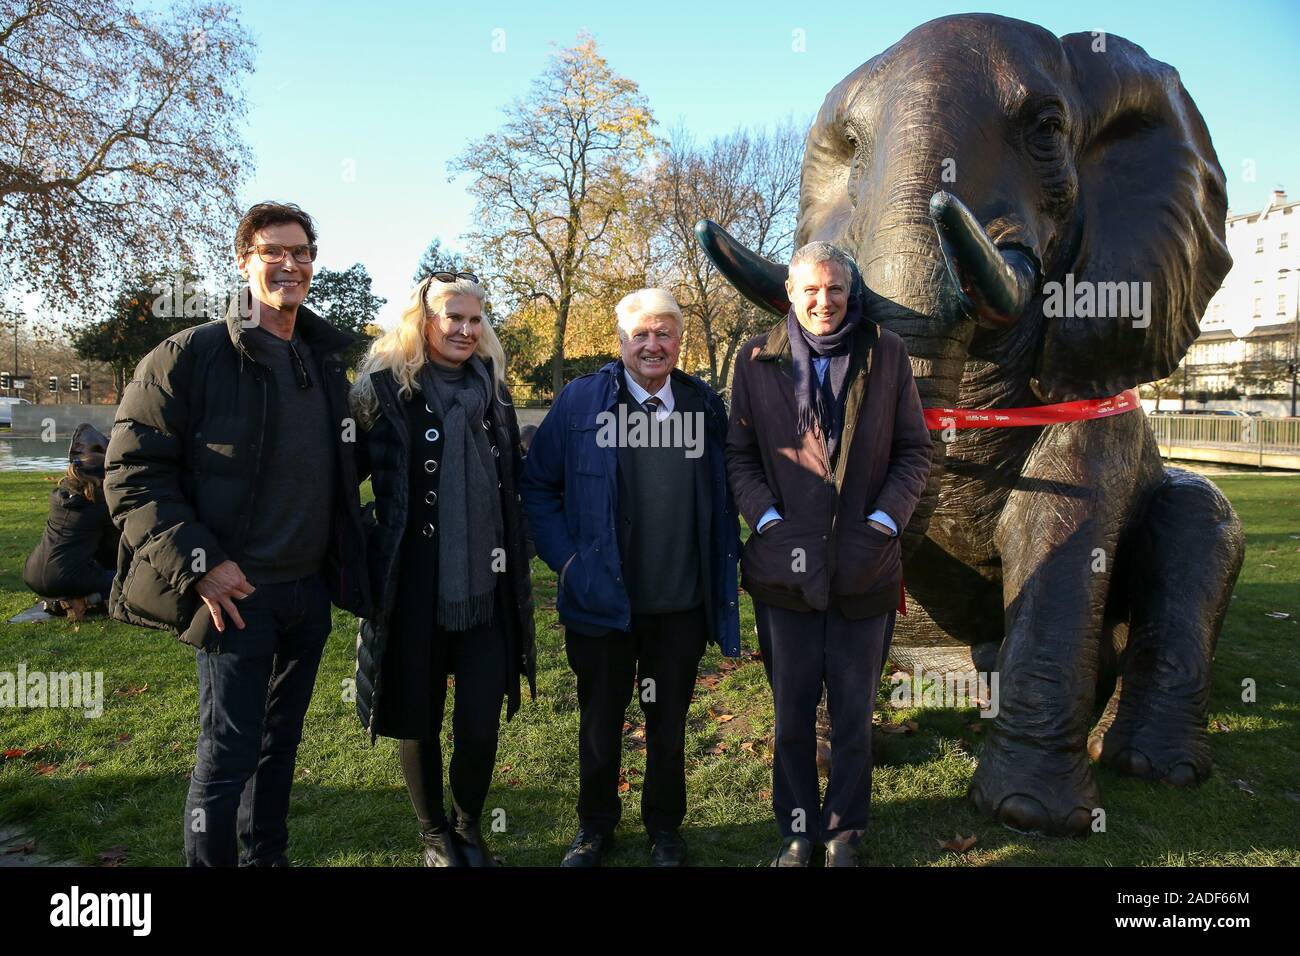 Marble Arch. London, UK 4 Dec 2019 - Artists Marc (L), Gillie (2nd from left), Author and father of the Prime Minister Boris Johnson, Stanley Johnson, (2nd from Right) and Parliamentary Conservative candidate for Richmond Park and North Kingston and former Tory candidate for Mayor of London Zac Goldsmith (R) pose with a bronze elephant during the unveiling of life-sized herd of 21 bronze elephants at Marble Arch. at Marble Arch. Credit: Dinendra Haria/Alamy Live News Stock Photo